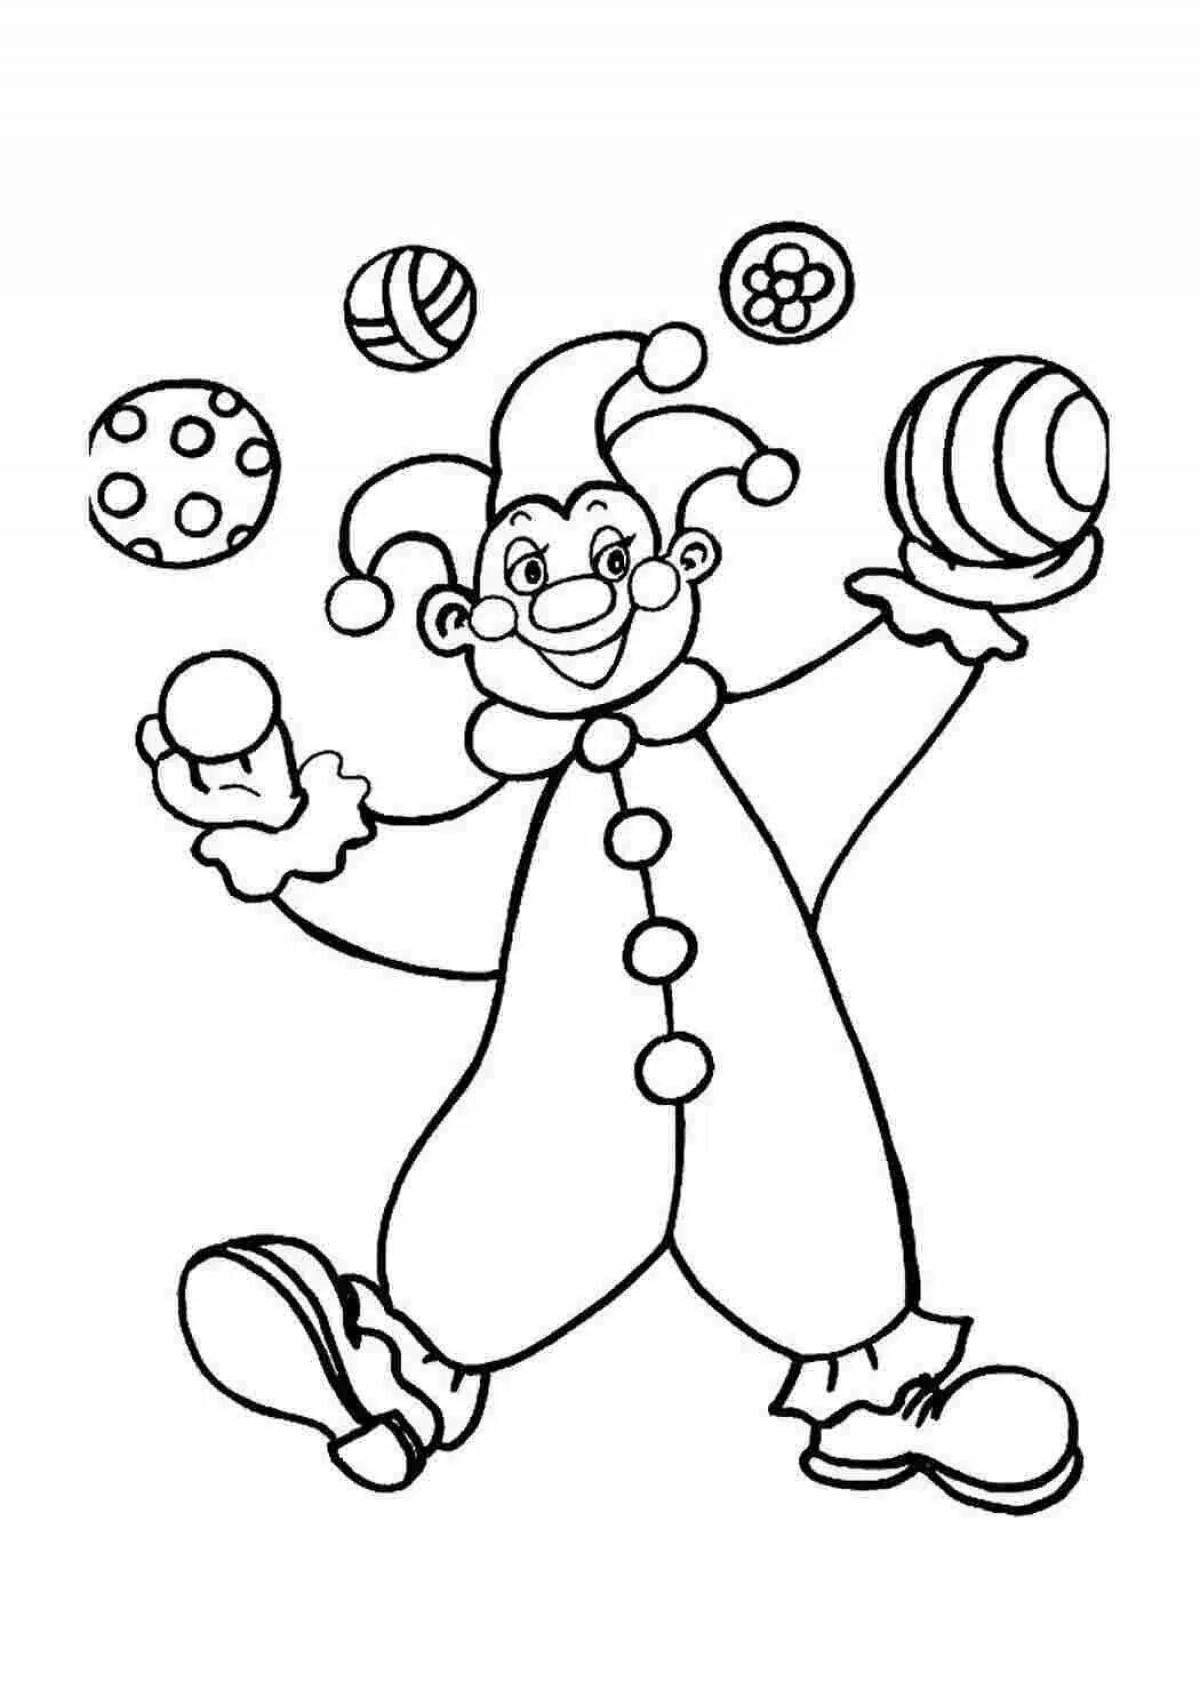 Zany buffoon coloring book for kids